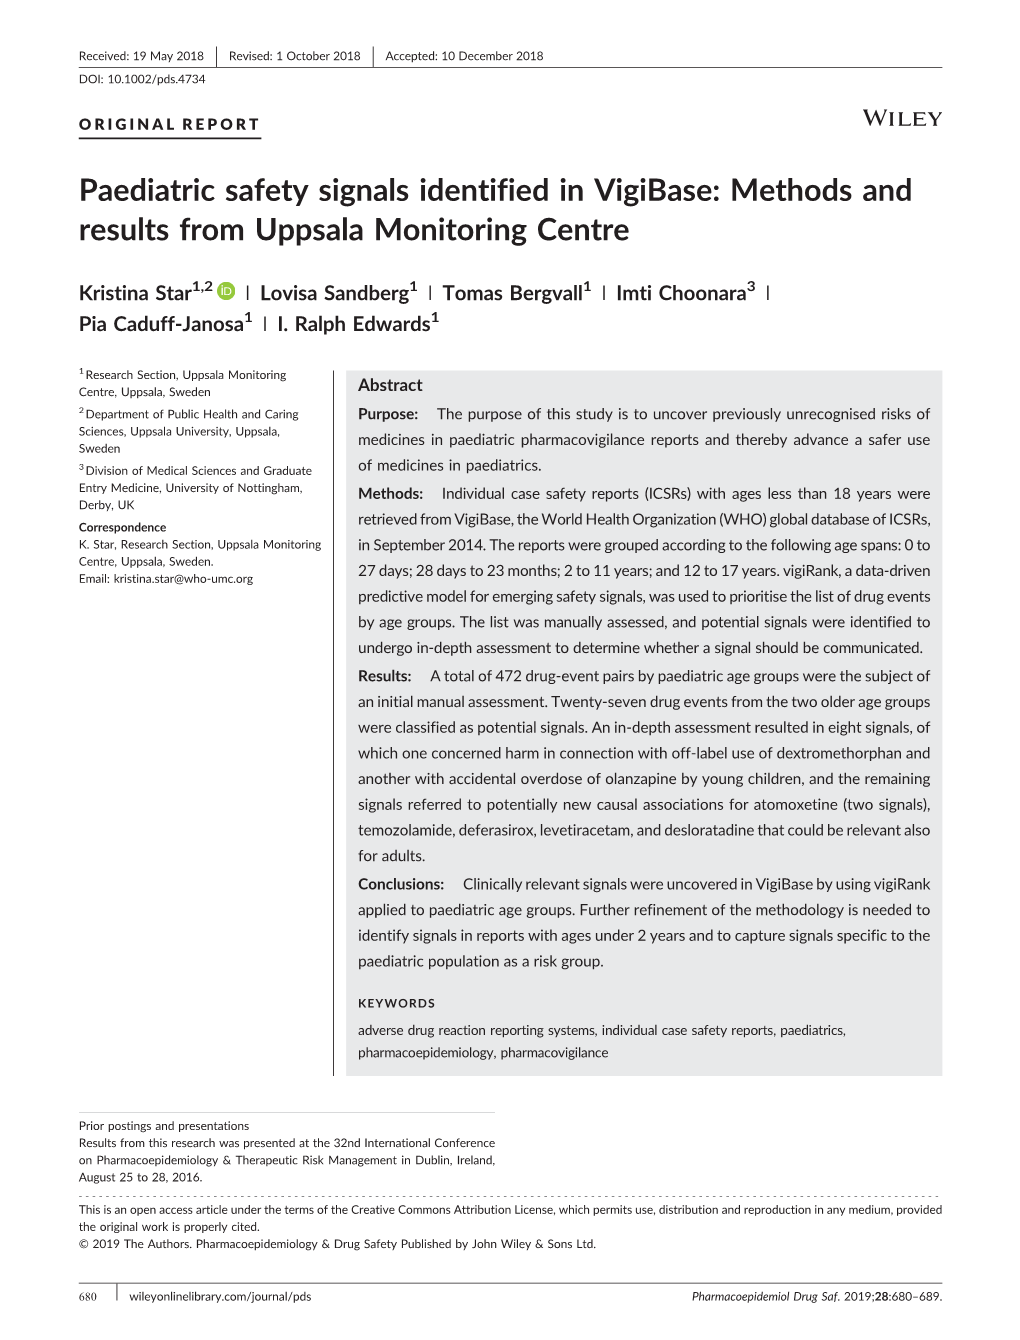 Paediatric Safety Signals Identified in Vigibase: Methods and Results from Uppsala Monitoring Centre